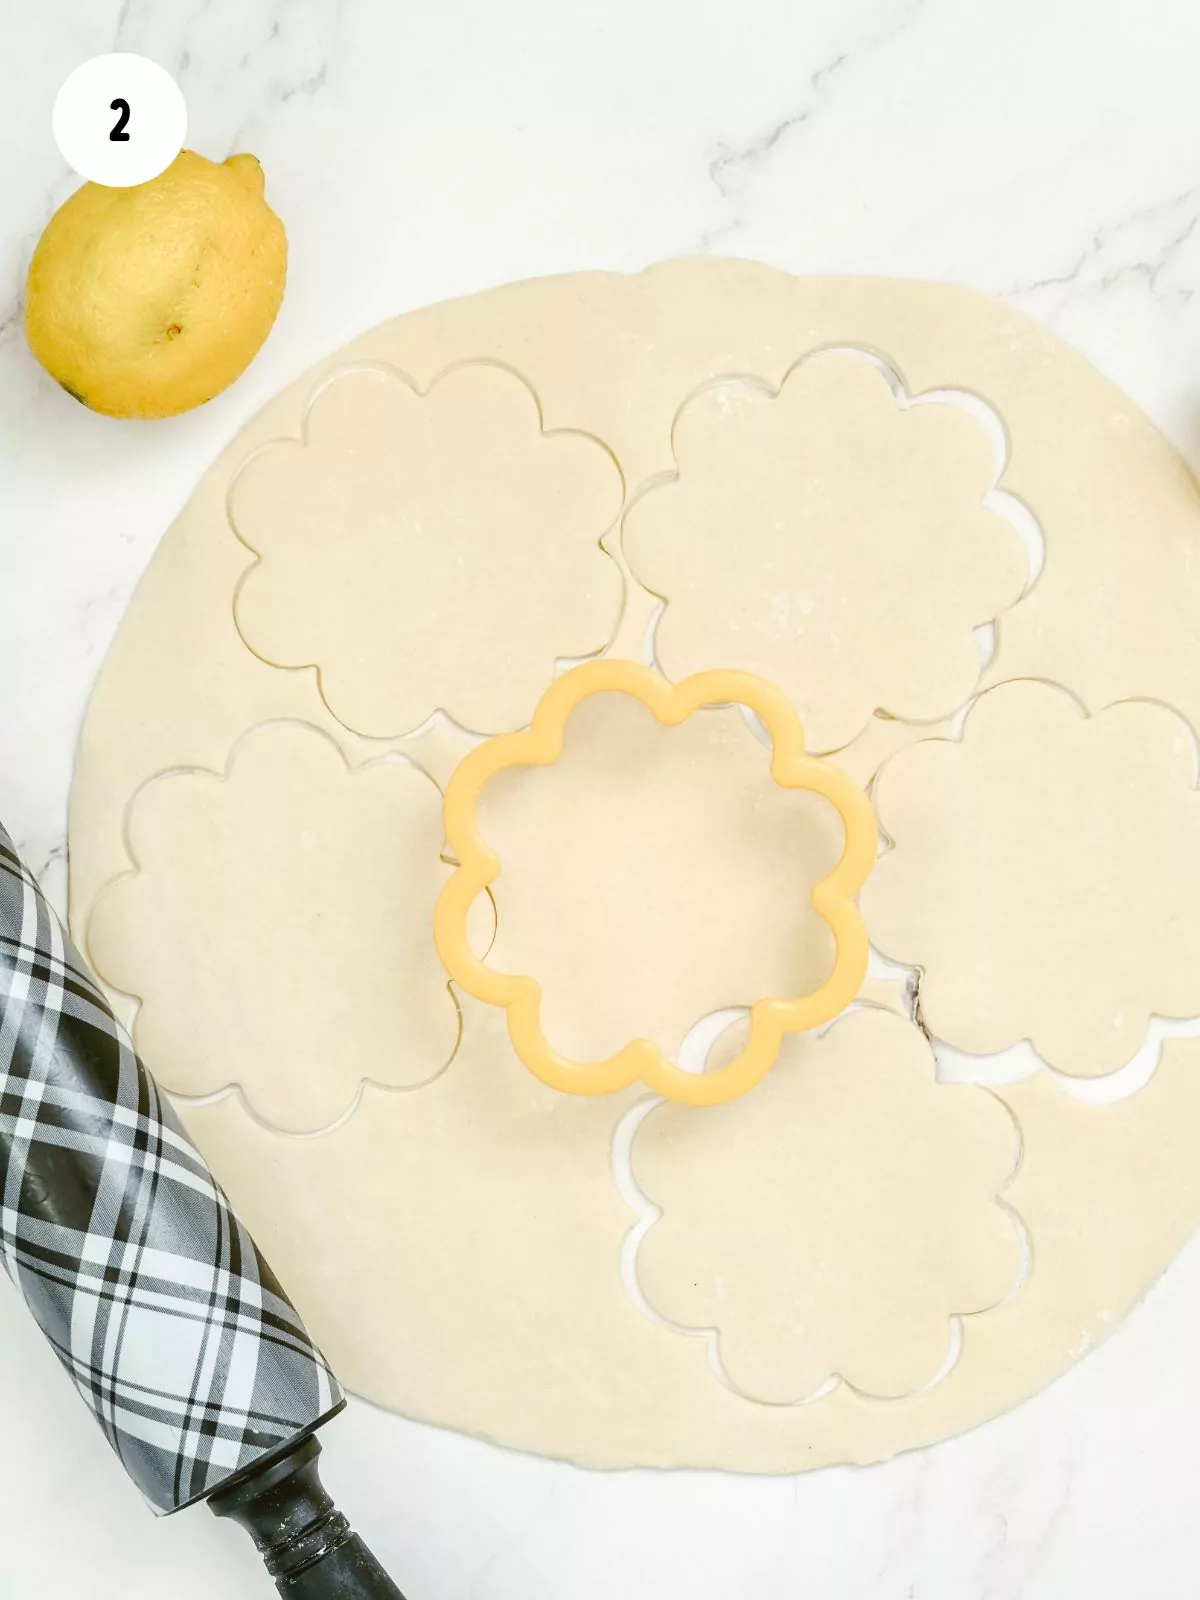 flower cookie cutter used to cut the pie dough out into flower shapes